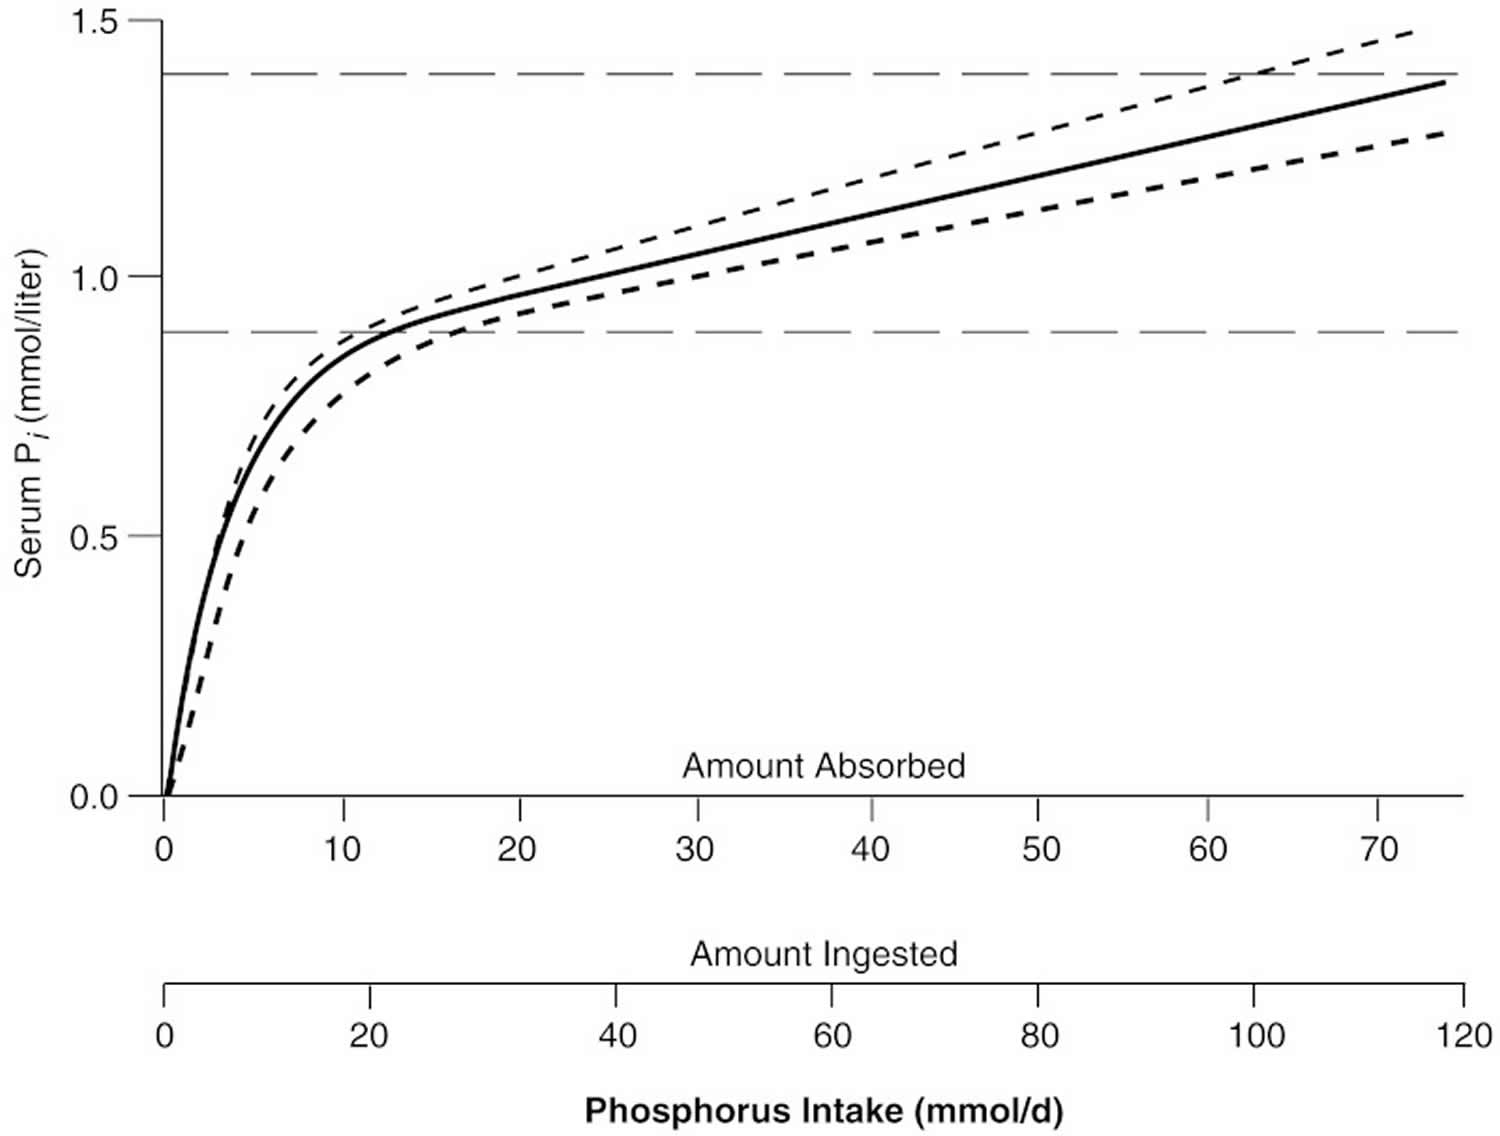 Relation of serum inorganic phosphate to absorbed intake in adults with normal renal function